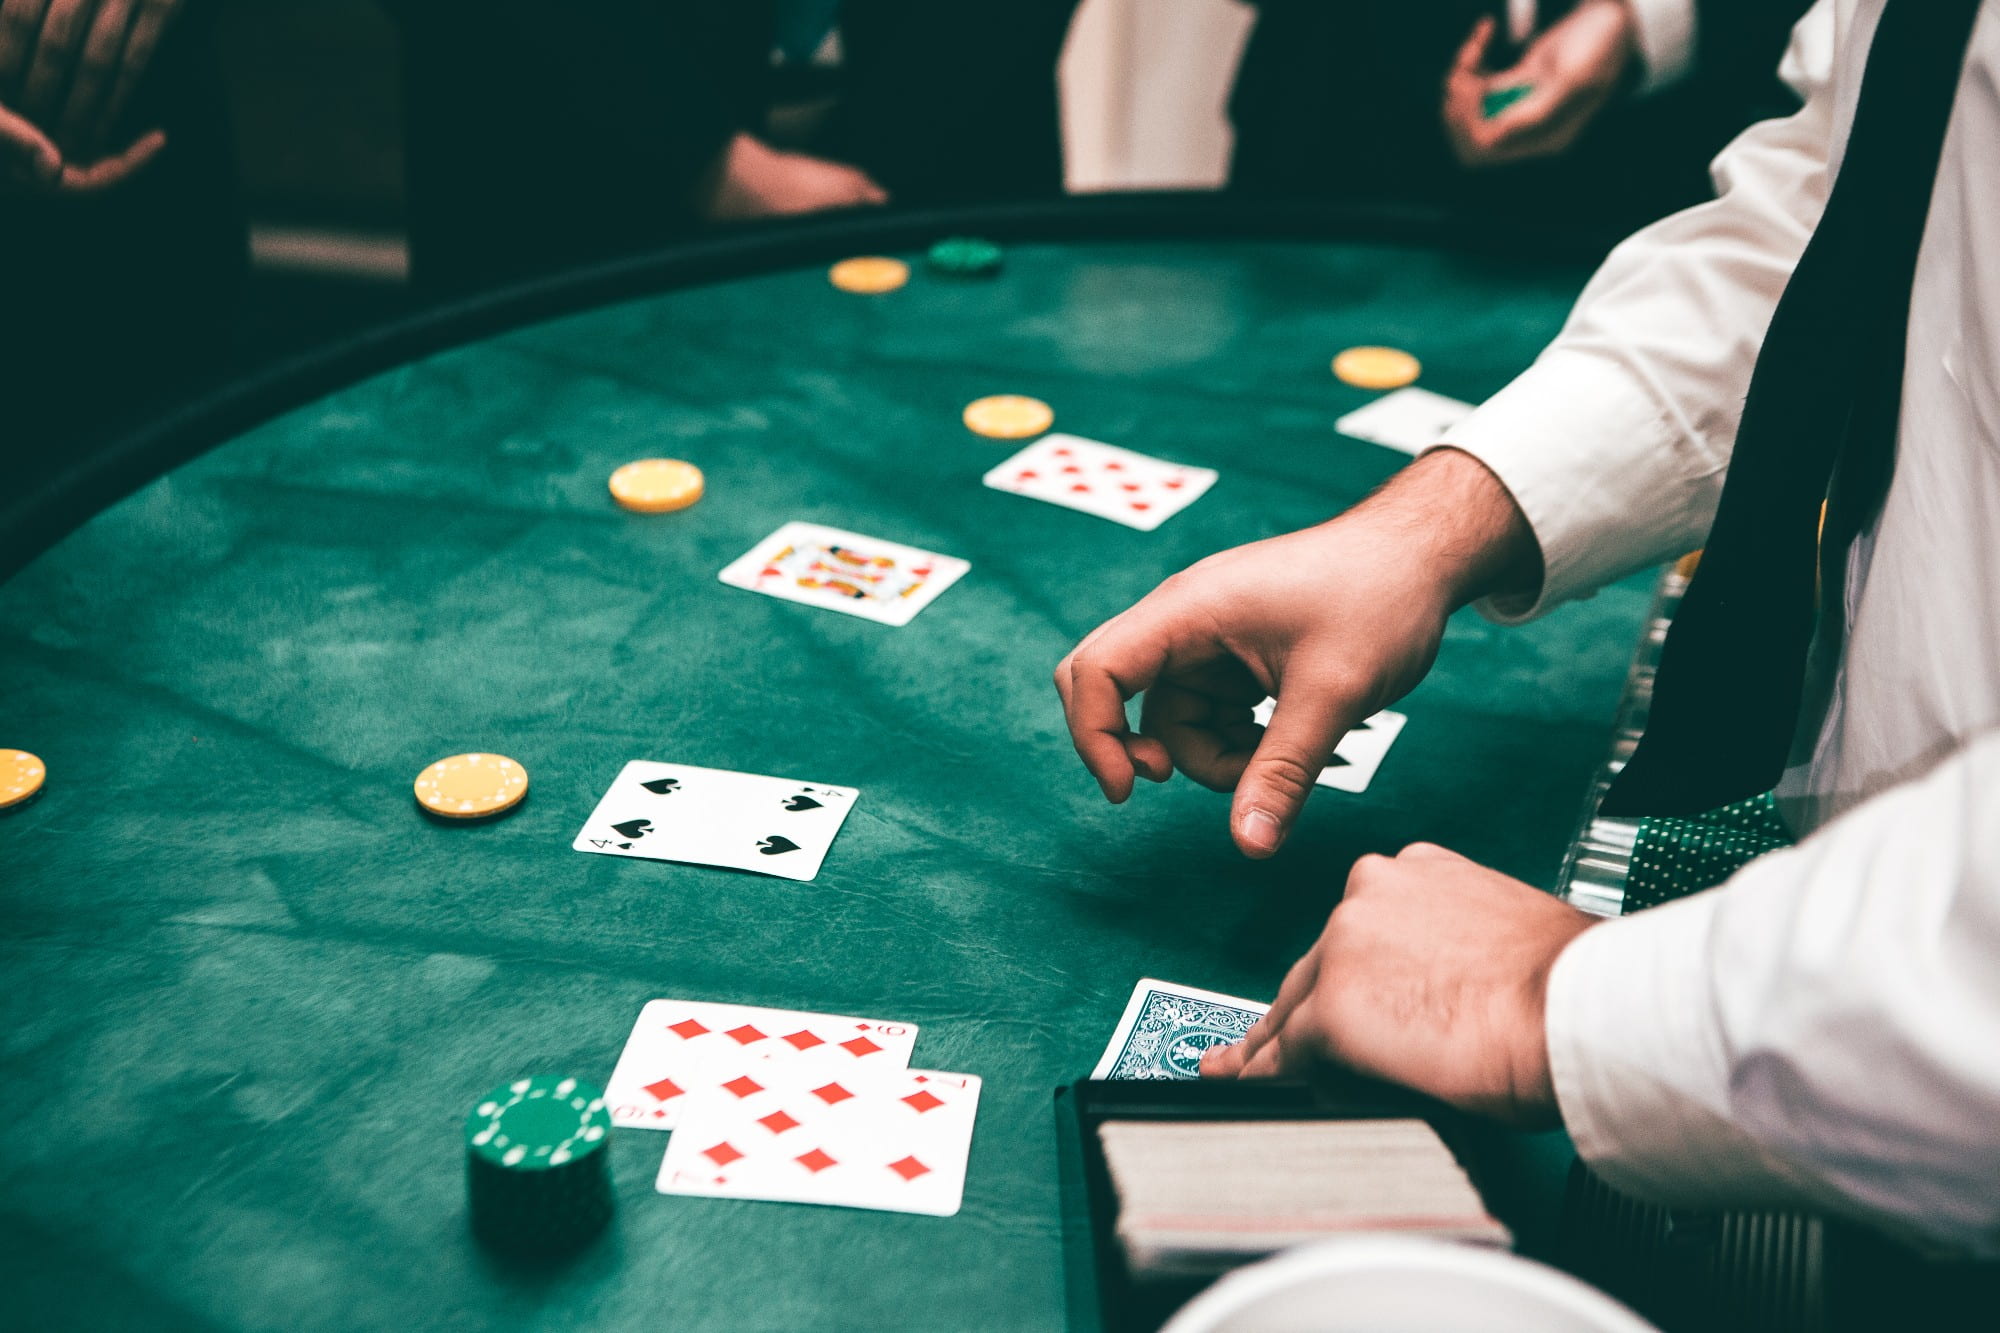 Helping My Husband With His Gambling Addiction | Gateway Foundation